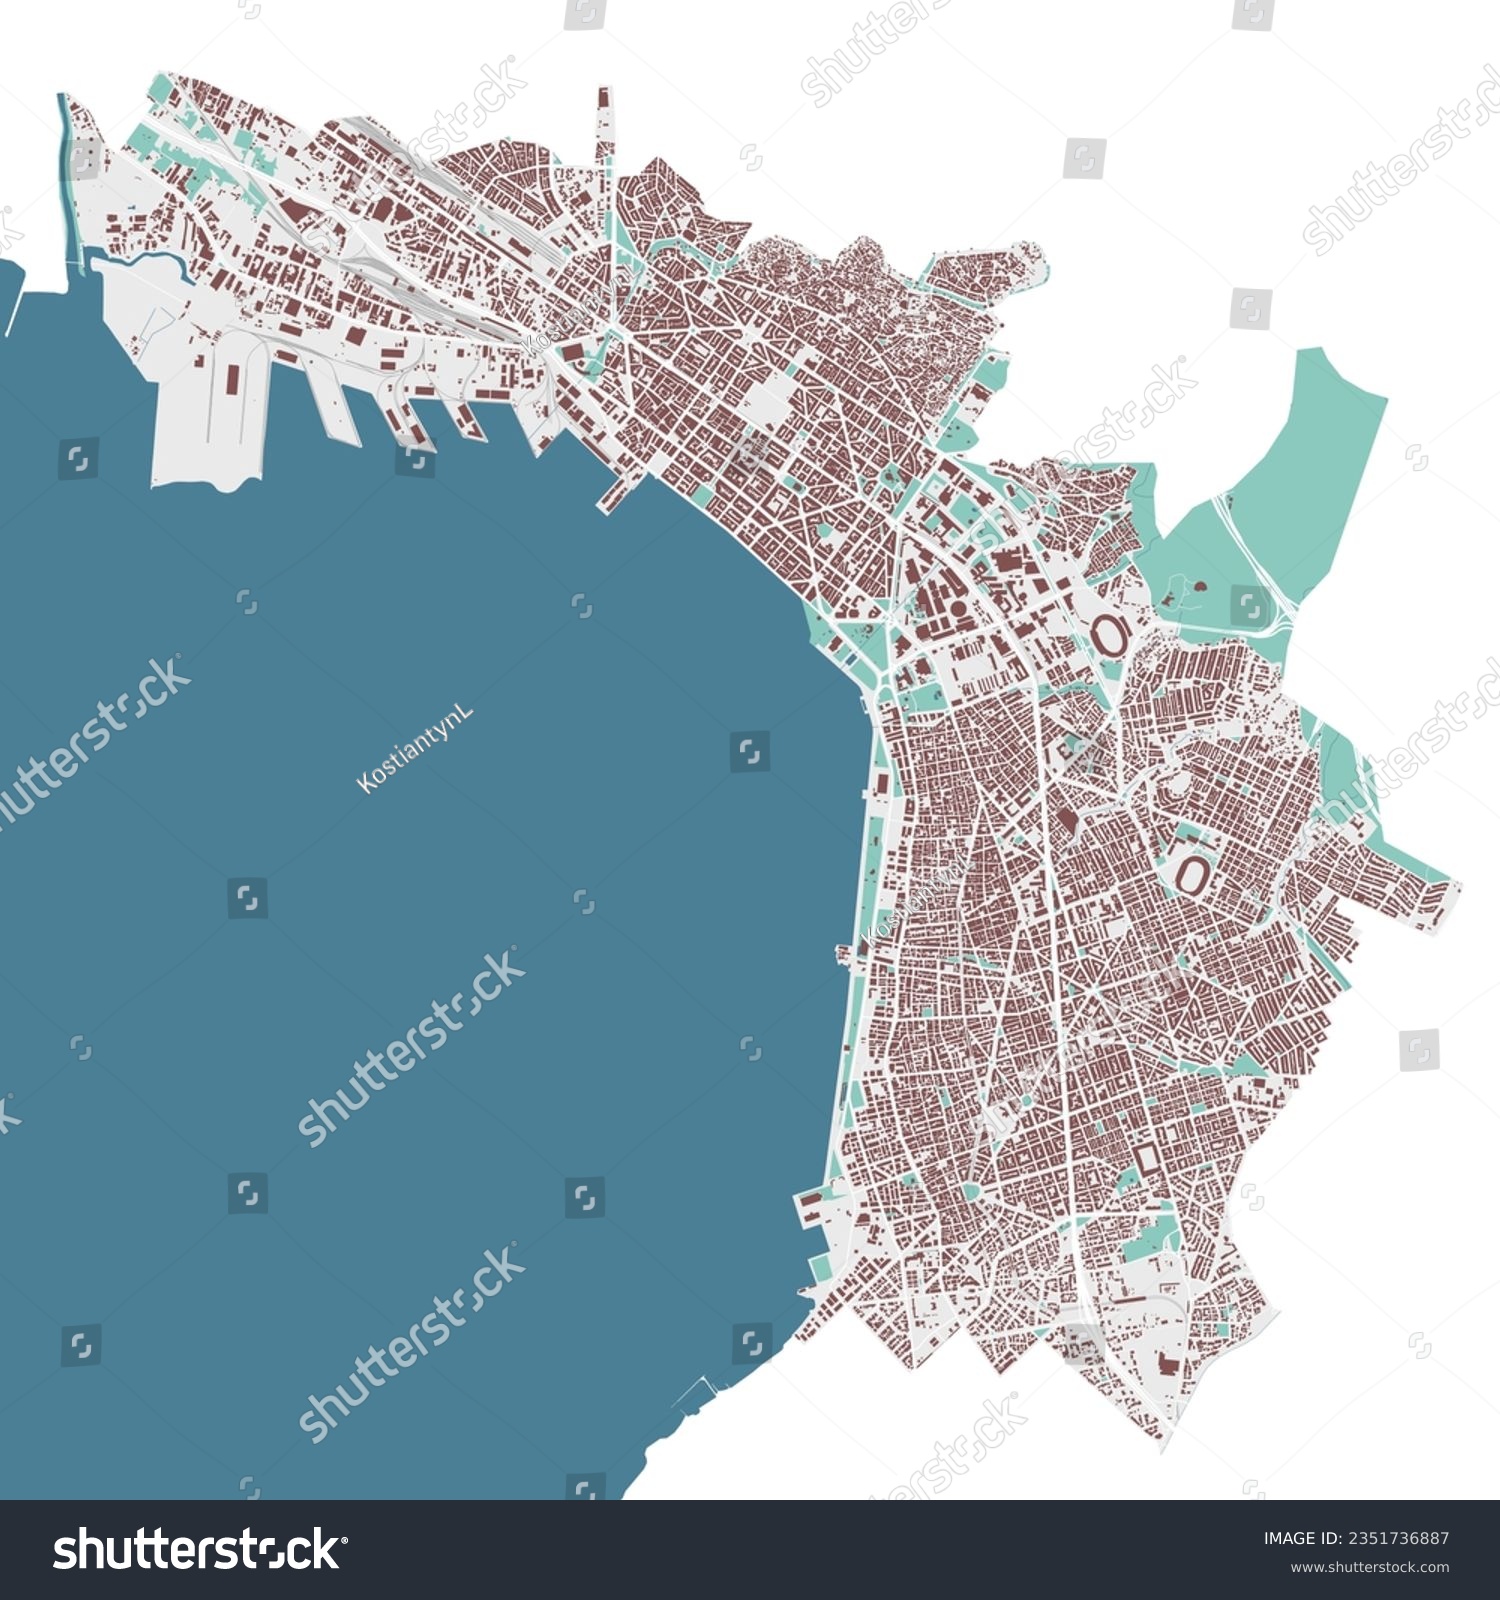 Thessaloniki map, detailed administrative area with border #2351736887